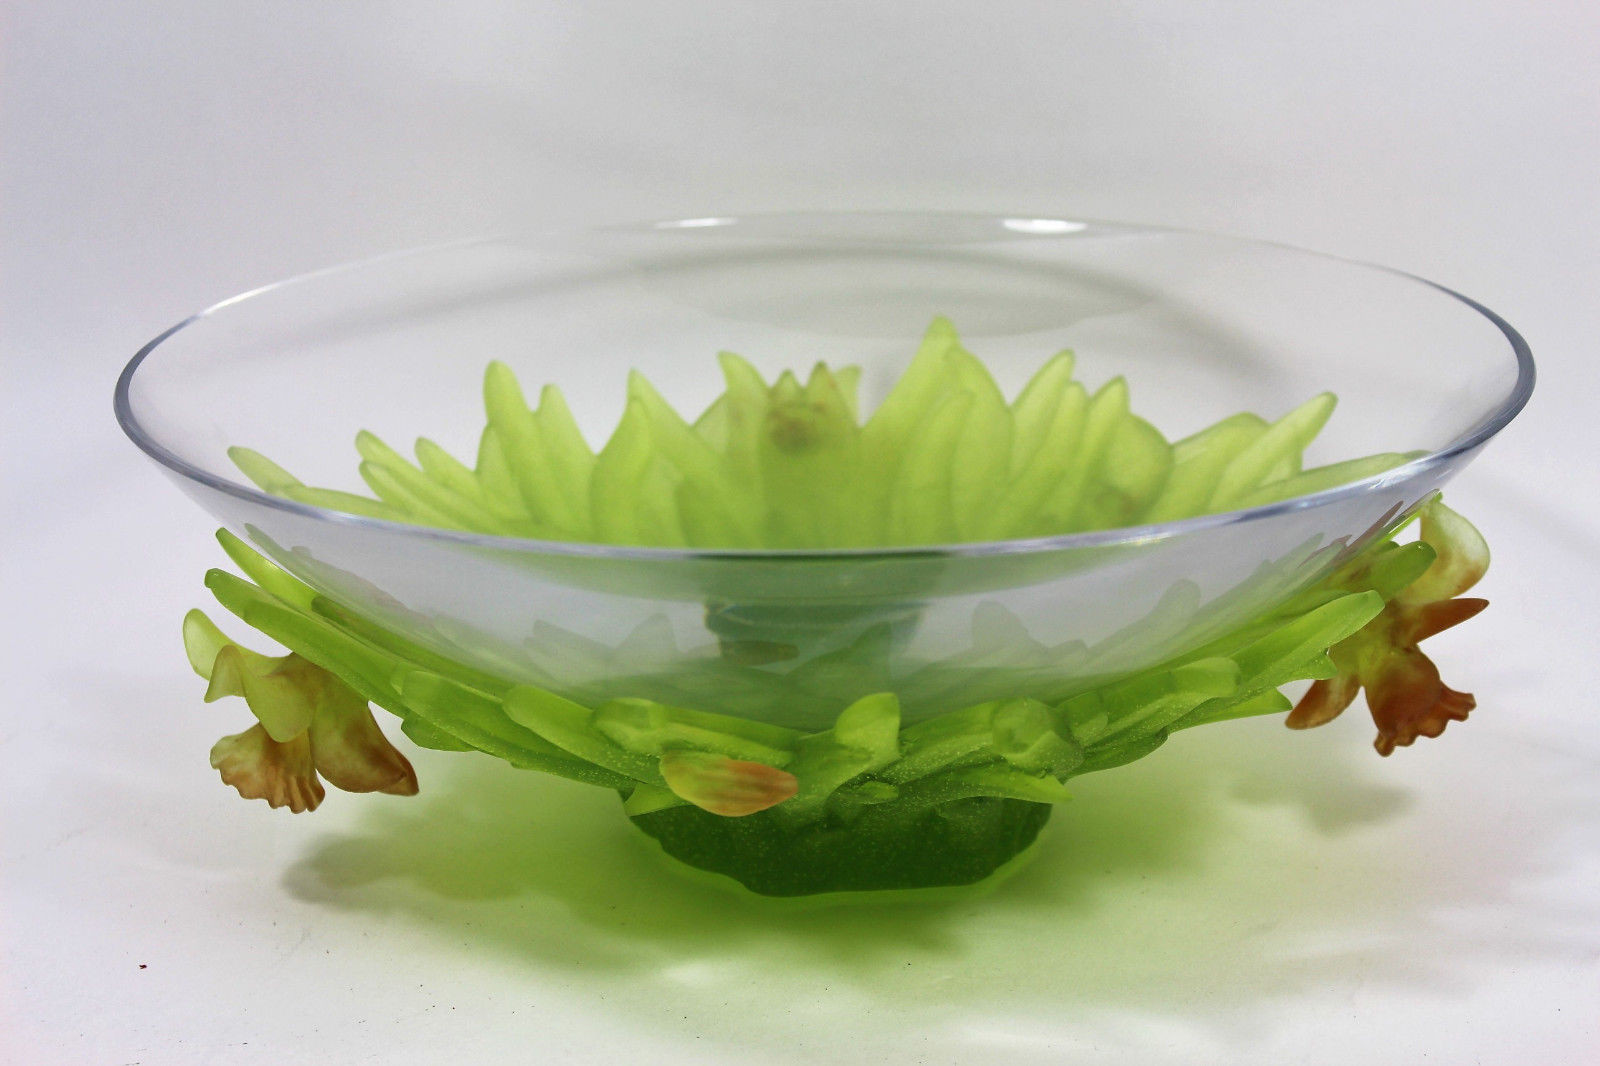 11 Best Daum Daffodil Vase 2024 free download daum daffodil vase of daum france pate de verre jonquille daffodil glass bowl from anne with 1 of 7 see more